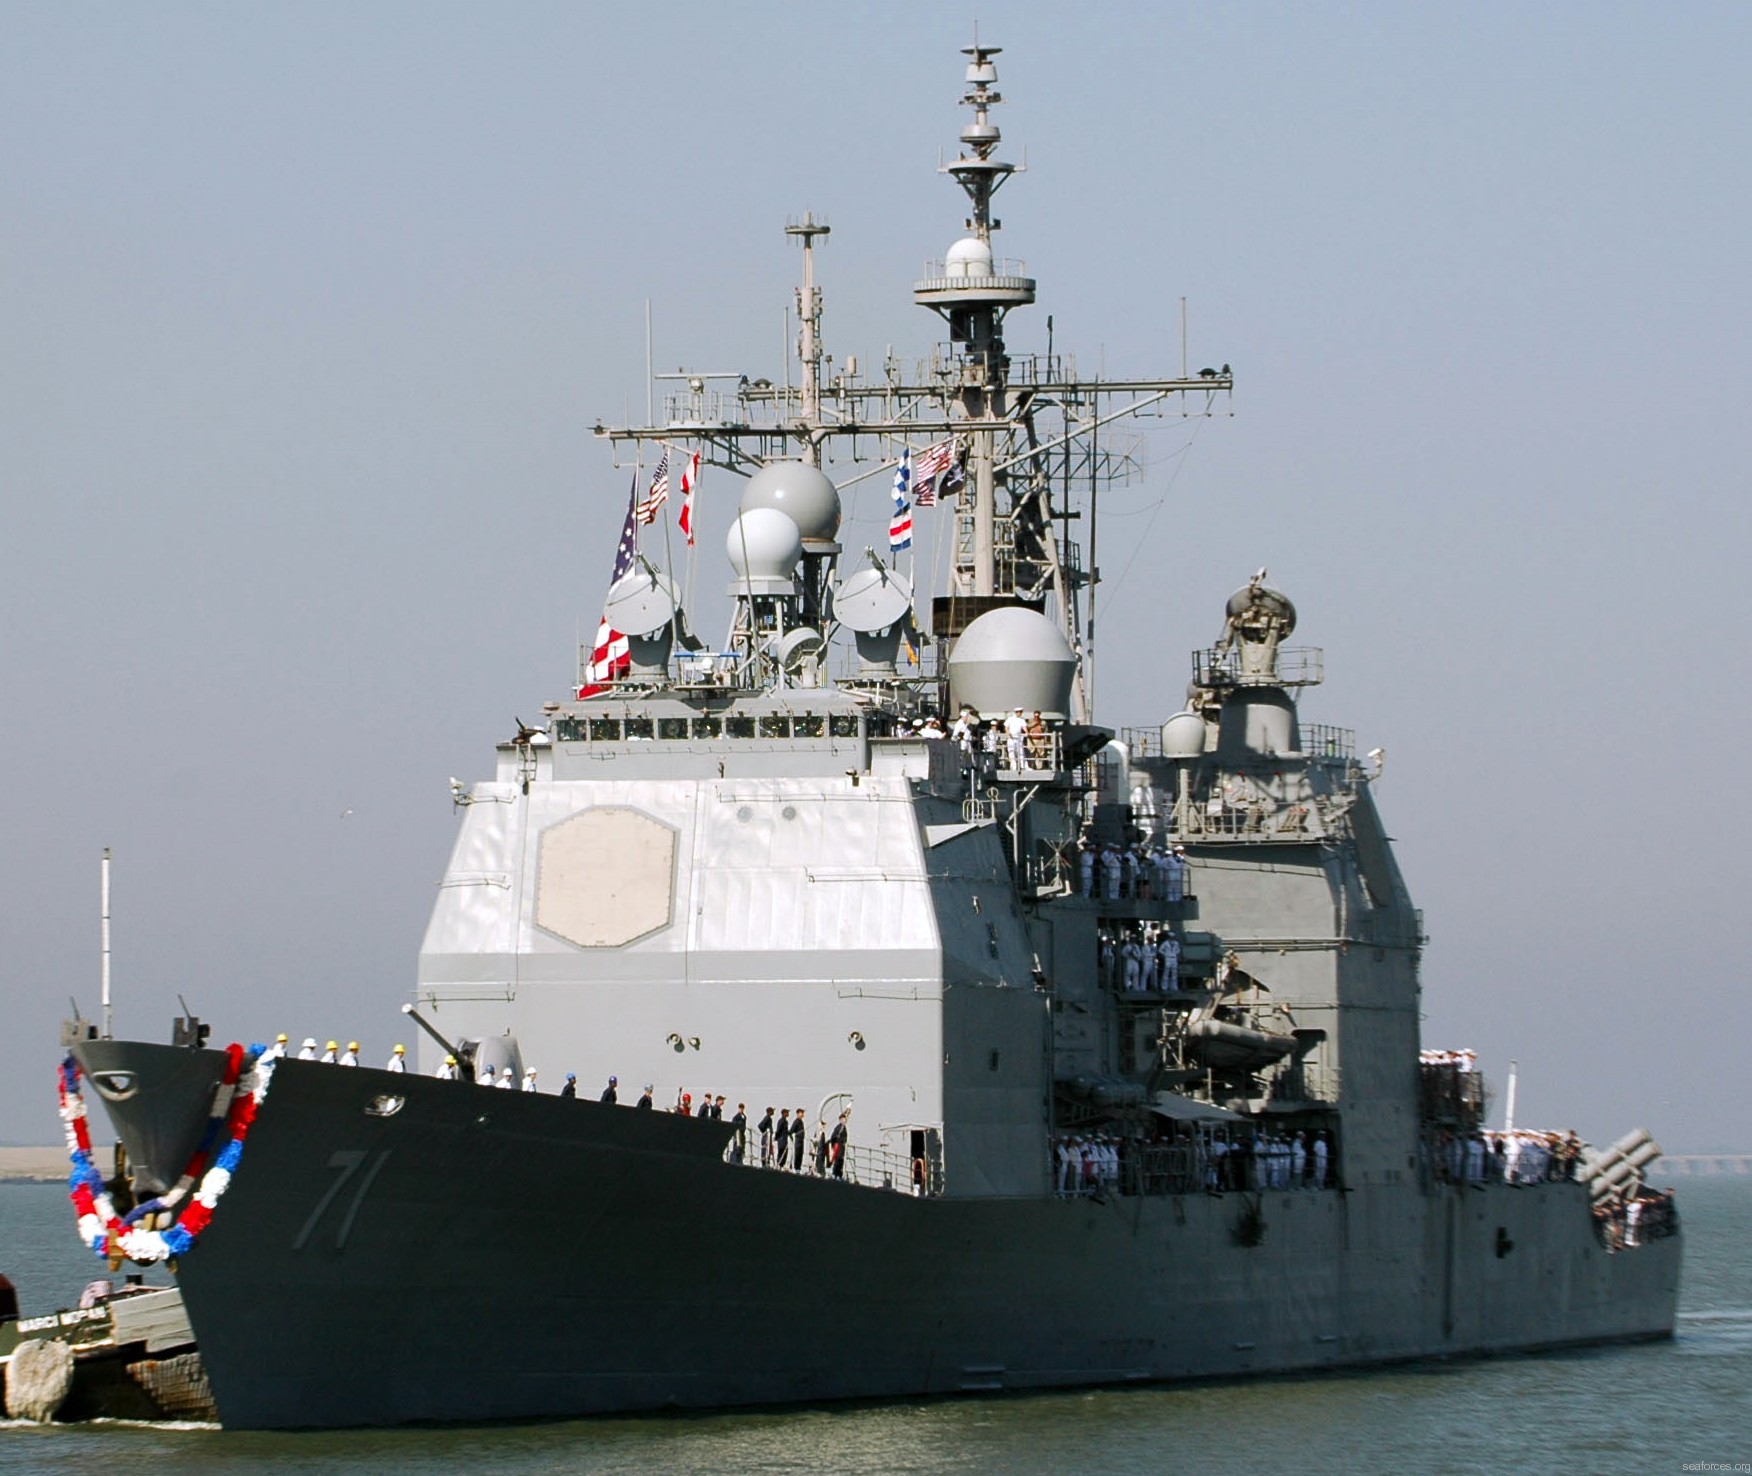 cg-71 uss cape st. george ticonderoga class guided missile cruiser us navy 60 naval station norfolk virginia